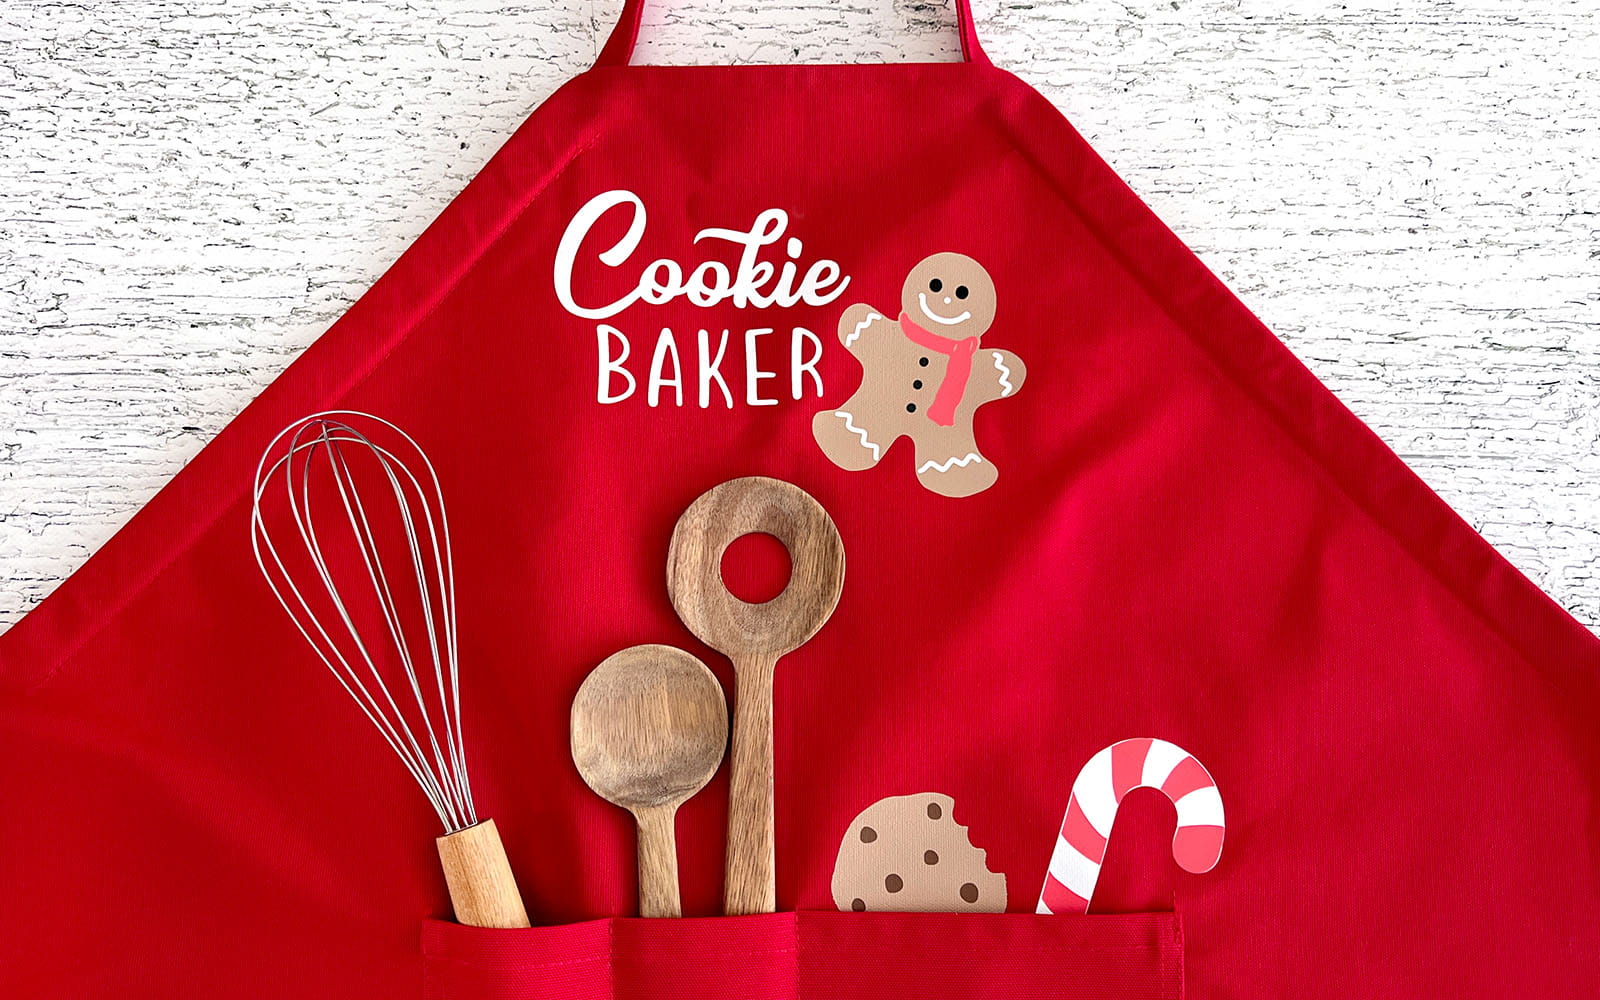 Red apron with baking utensils in pocket